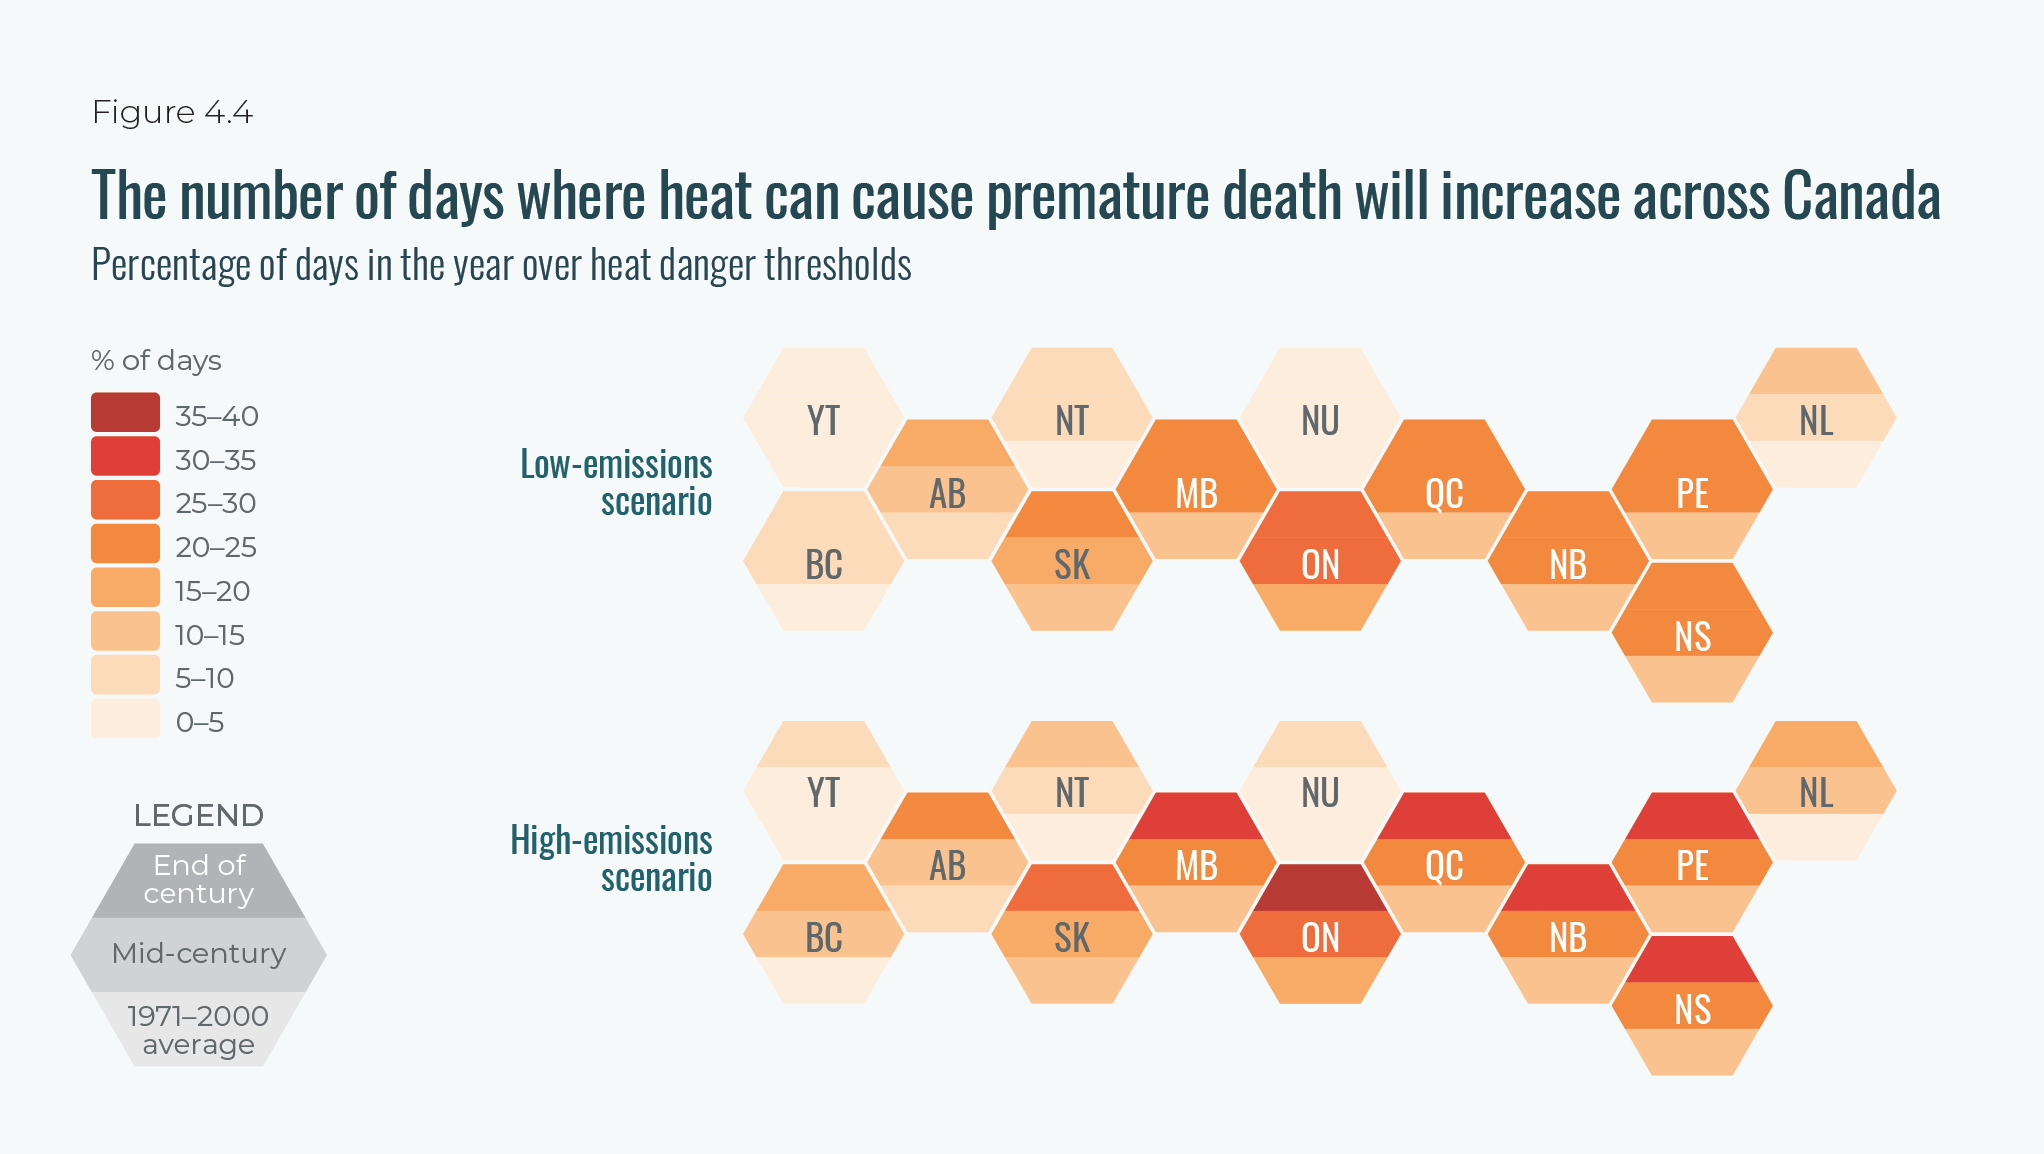 This dataviz shows the number of days where heat can cause premature death will increase across Canada, in a low-emissions scenario and in a high-emissions scenario. 